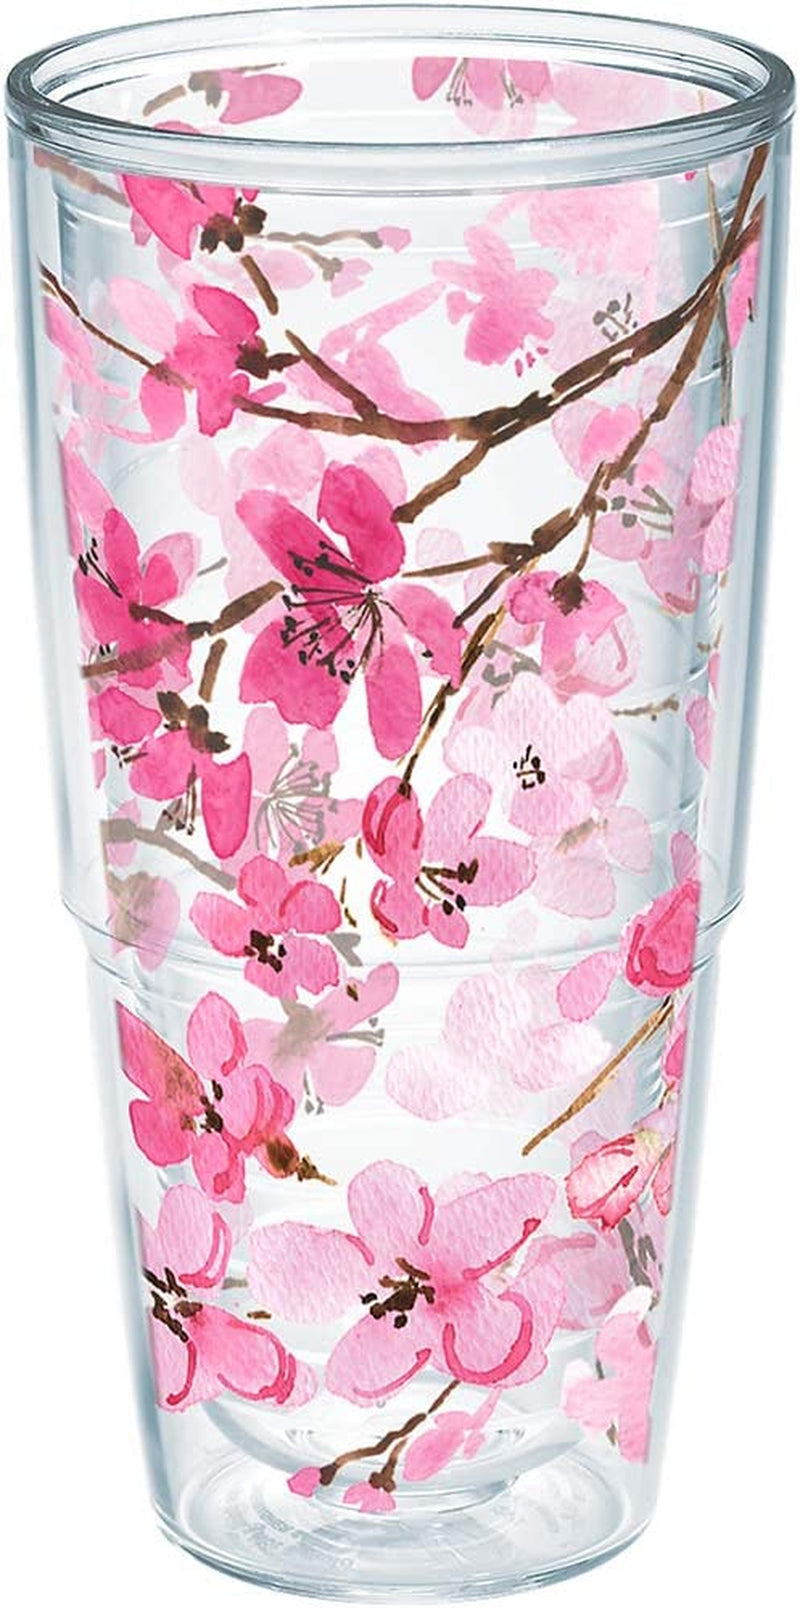 Tervis Made in USA Double Walled Sakura Japanese Cherry Blossom Insulated Tumbler Cup Keeps Drinks Cold & Hot, 24Oz, Classic - Lidded Home & Garden > Kitchen & Dining > Tableware > Drinkware Tervis Classic - Unlidded 24oz 